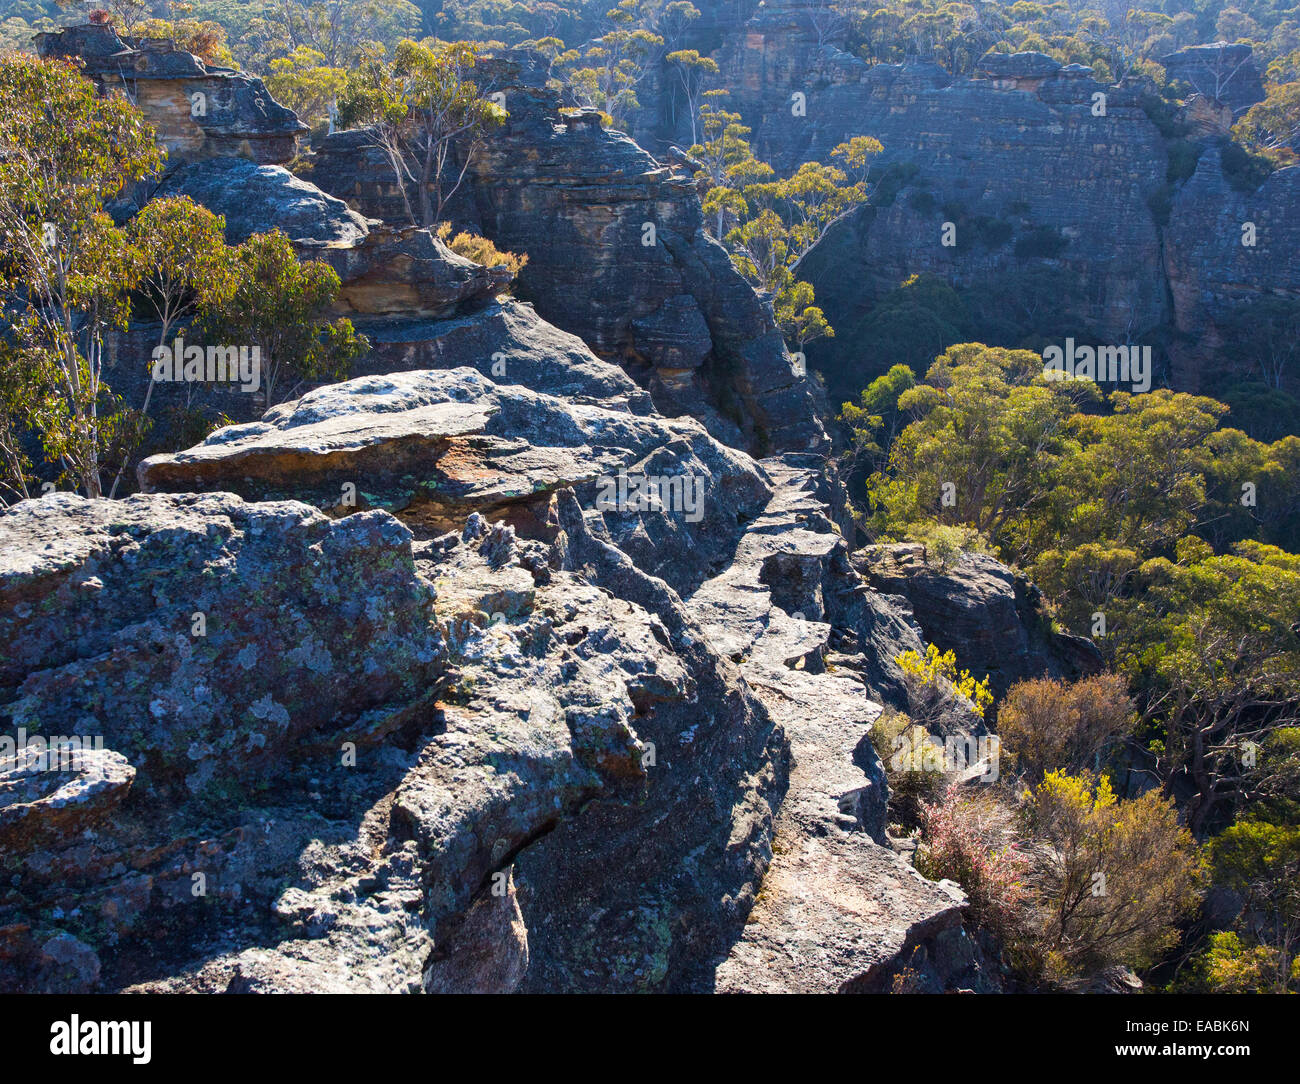 View of bushland and rugged sandstone gorges in Blue Mountains National Park, NSW, Australia Stock Photo